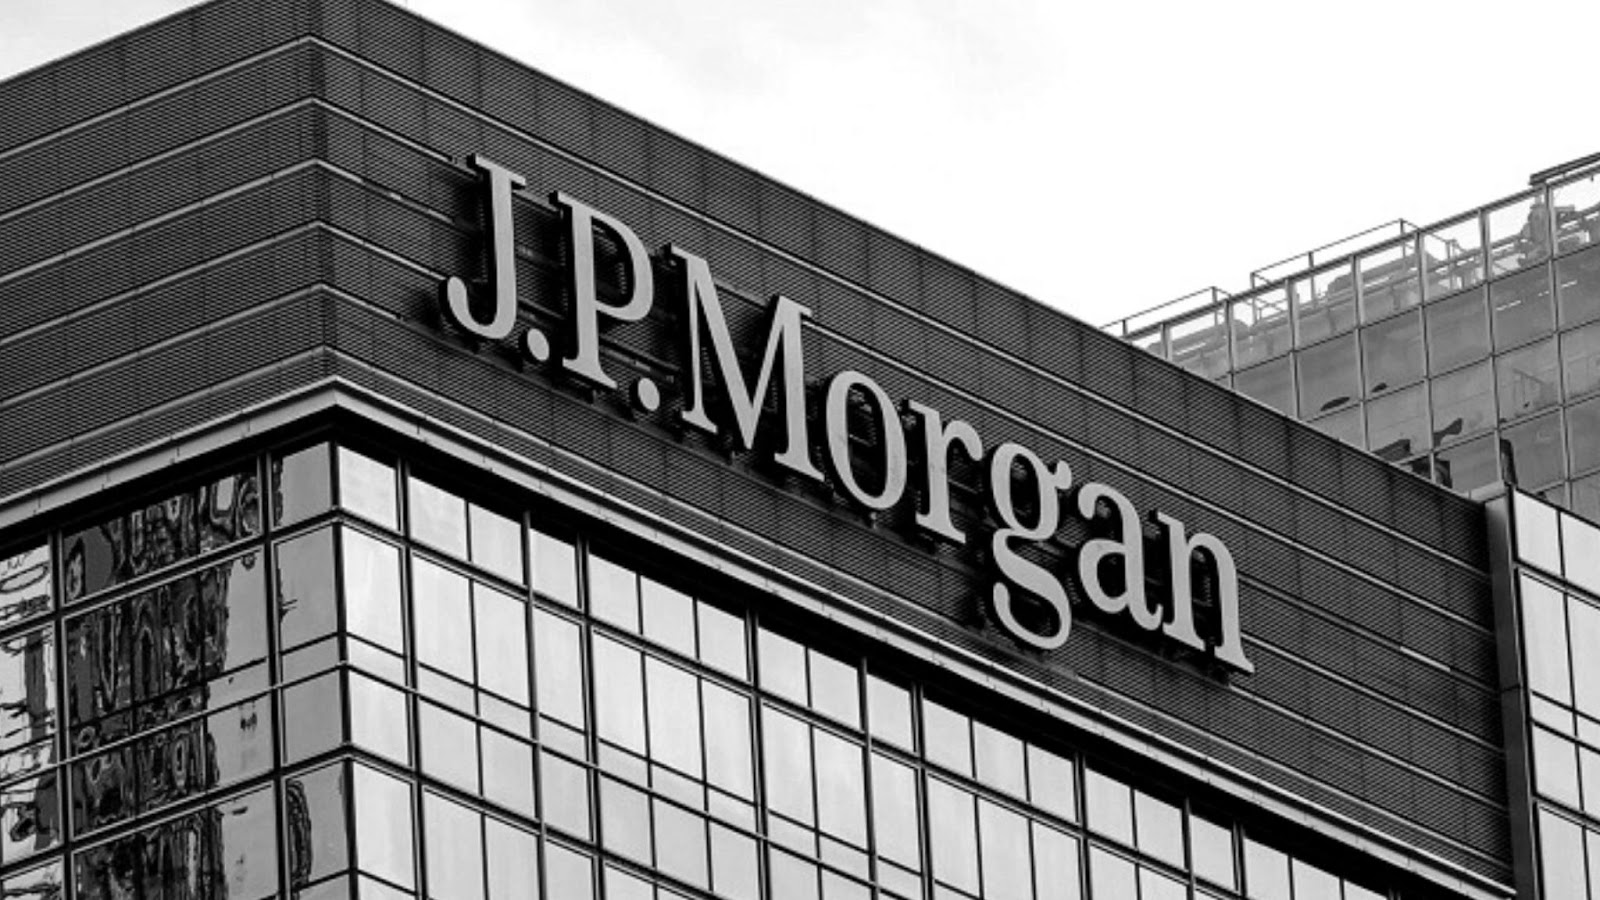 JP Morgan Chase To Hire 5,000 Technologists In India